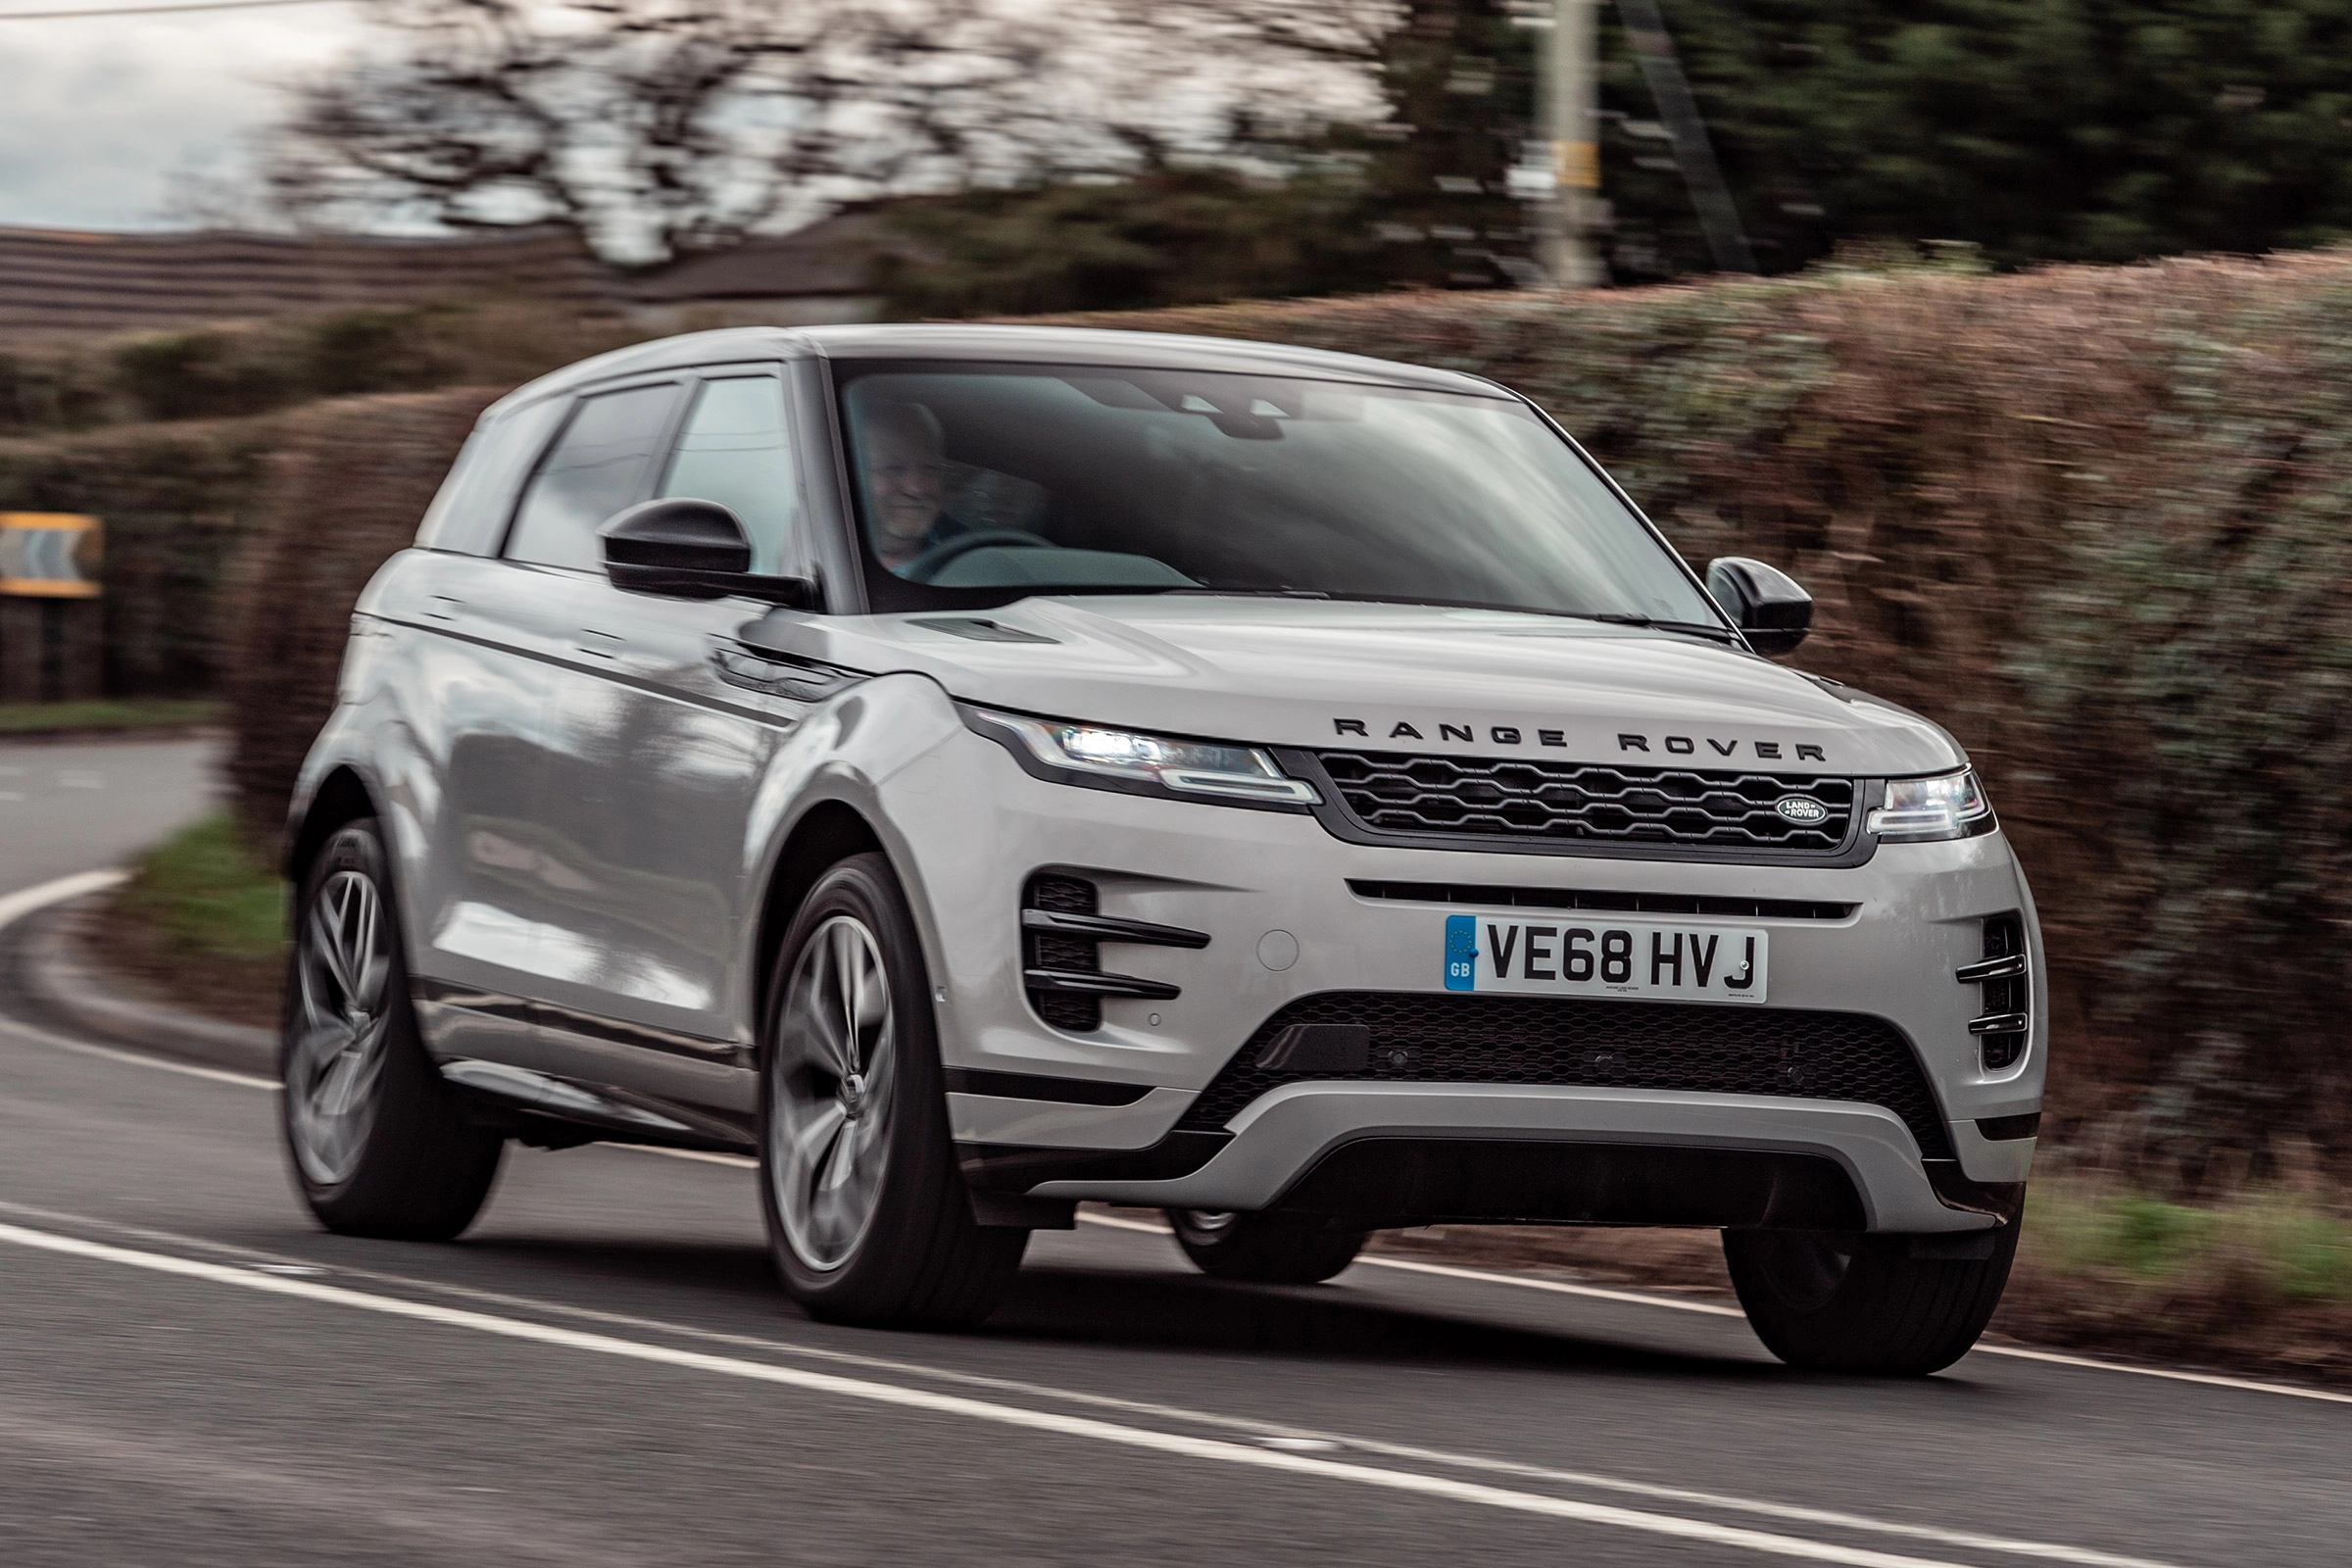 Pricing and Packages for Land Rover SUVs and Crossovers